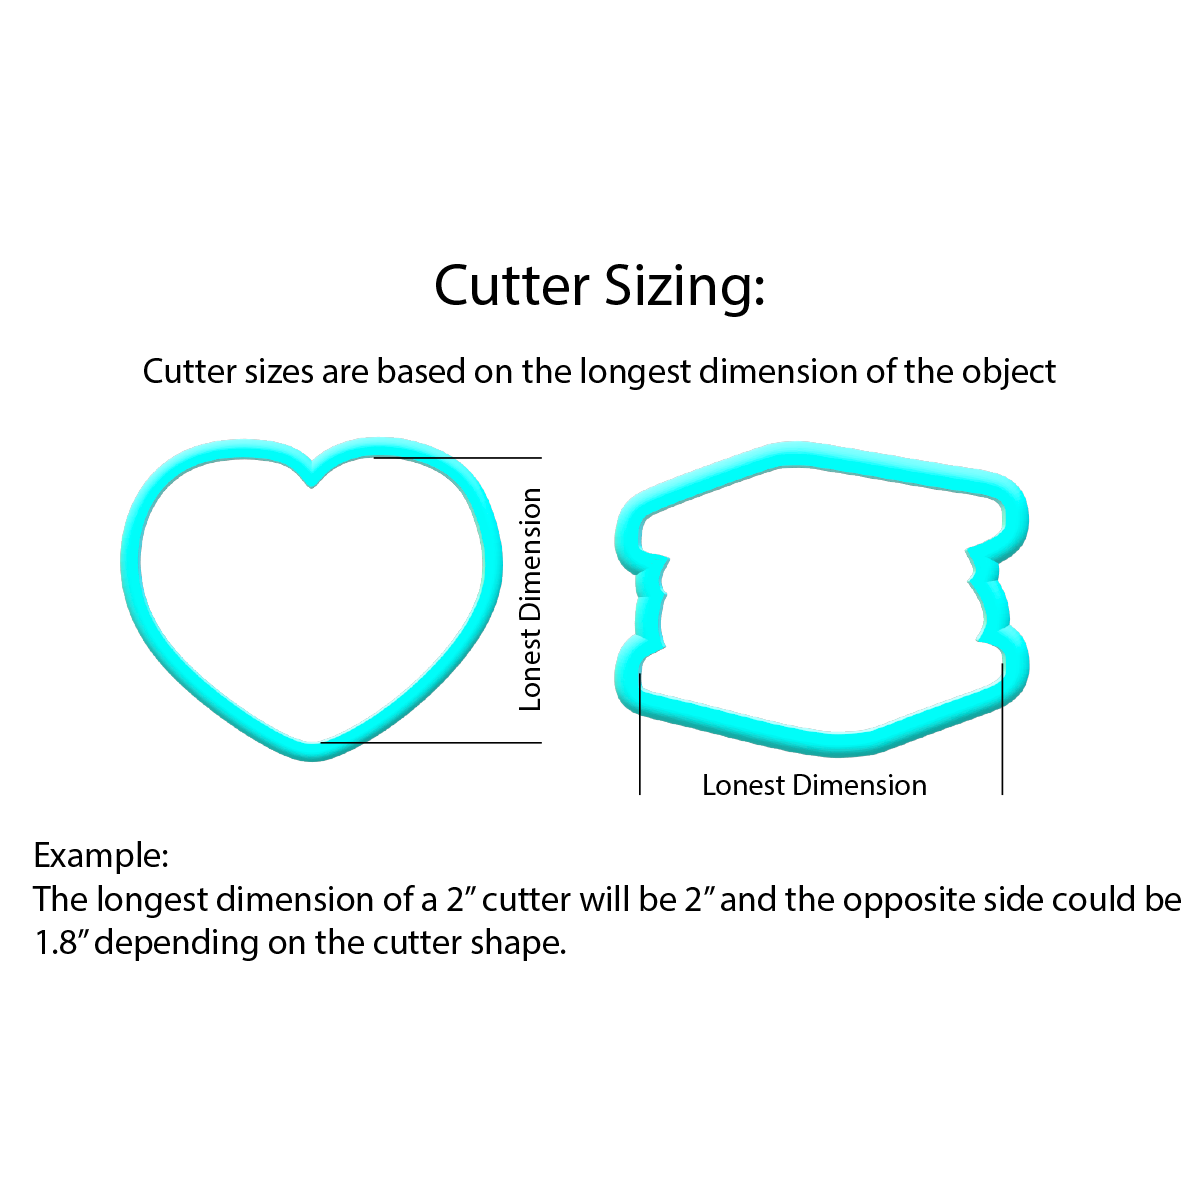 Dog House Cookie Cutter | STL File